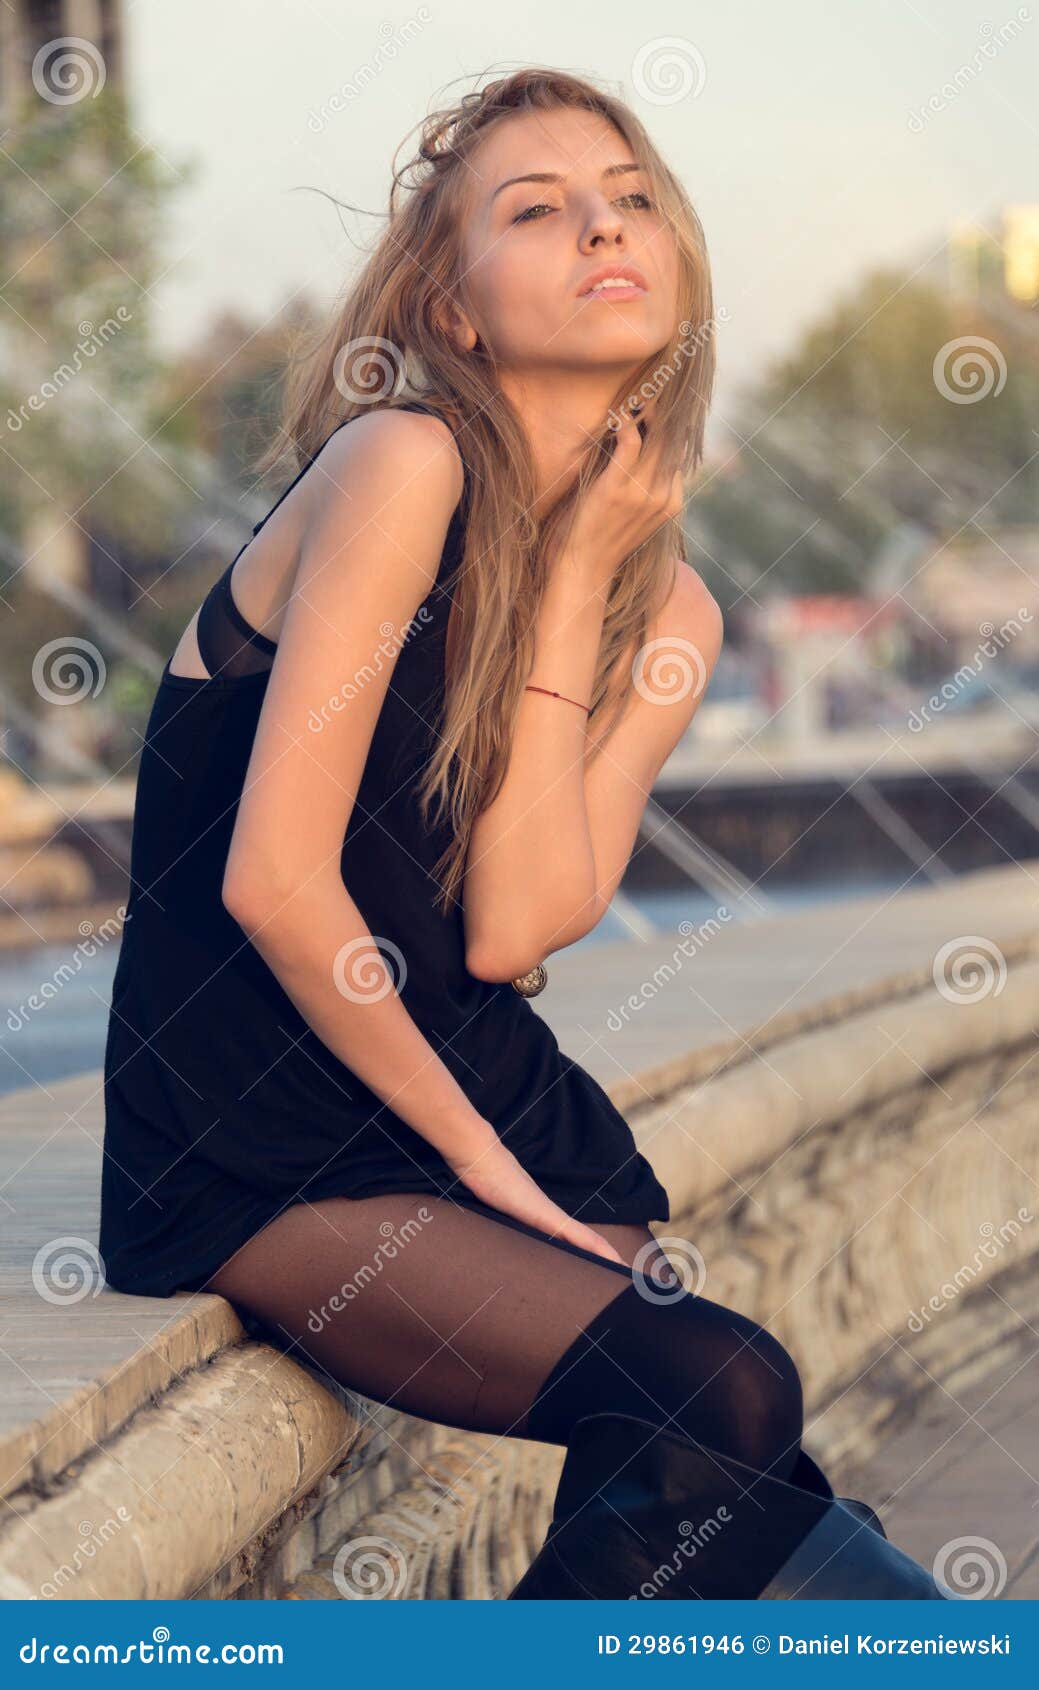 Sexy Woman In A Short Black Dress Royalty Free Stock Image